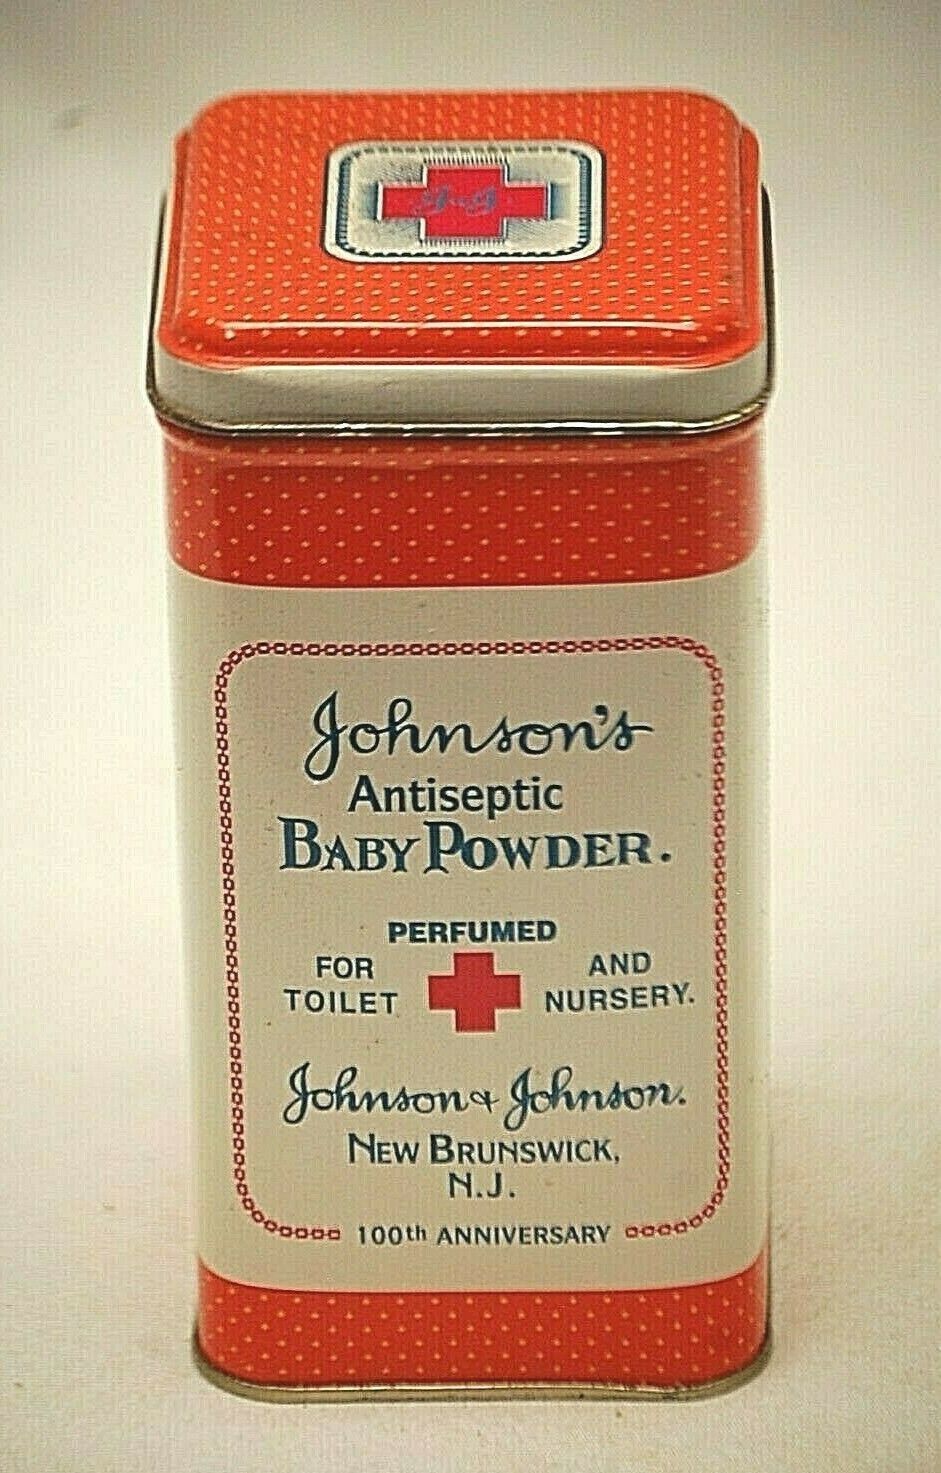 Johnson's Replica Metal Tin Box Antiseptic Baby Powder Perfumed Container Can - $14.84